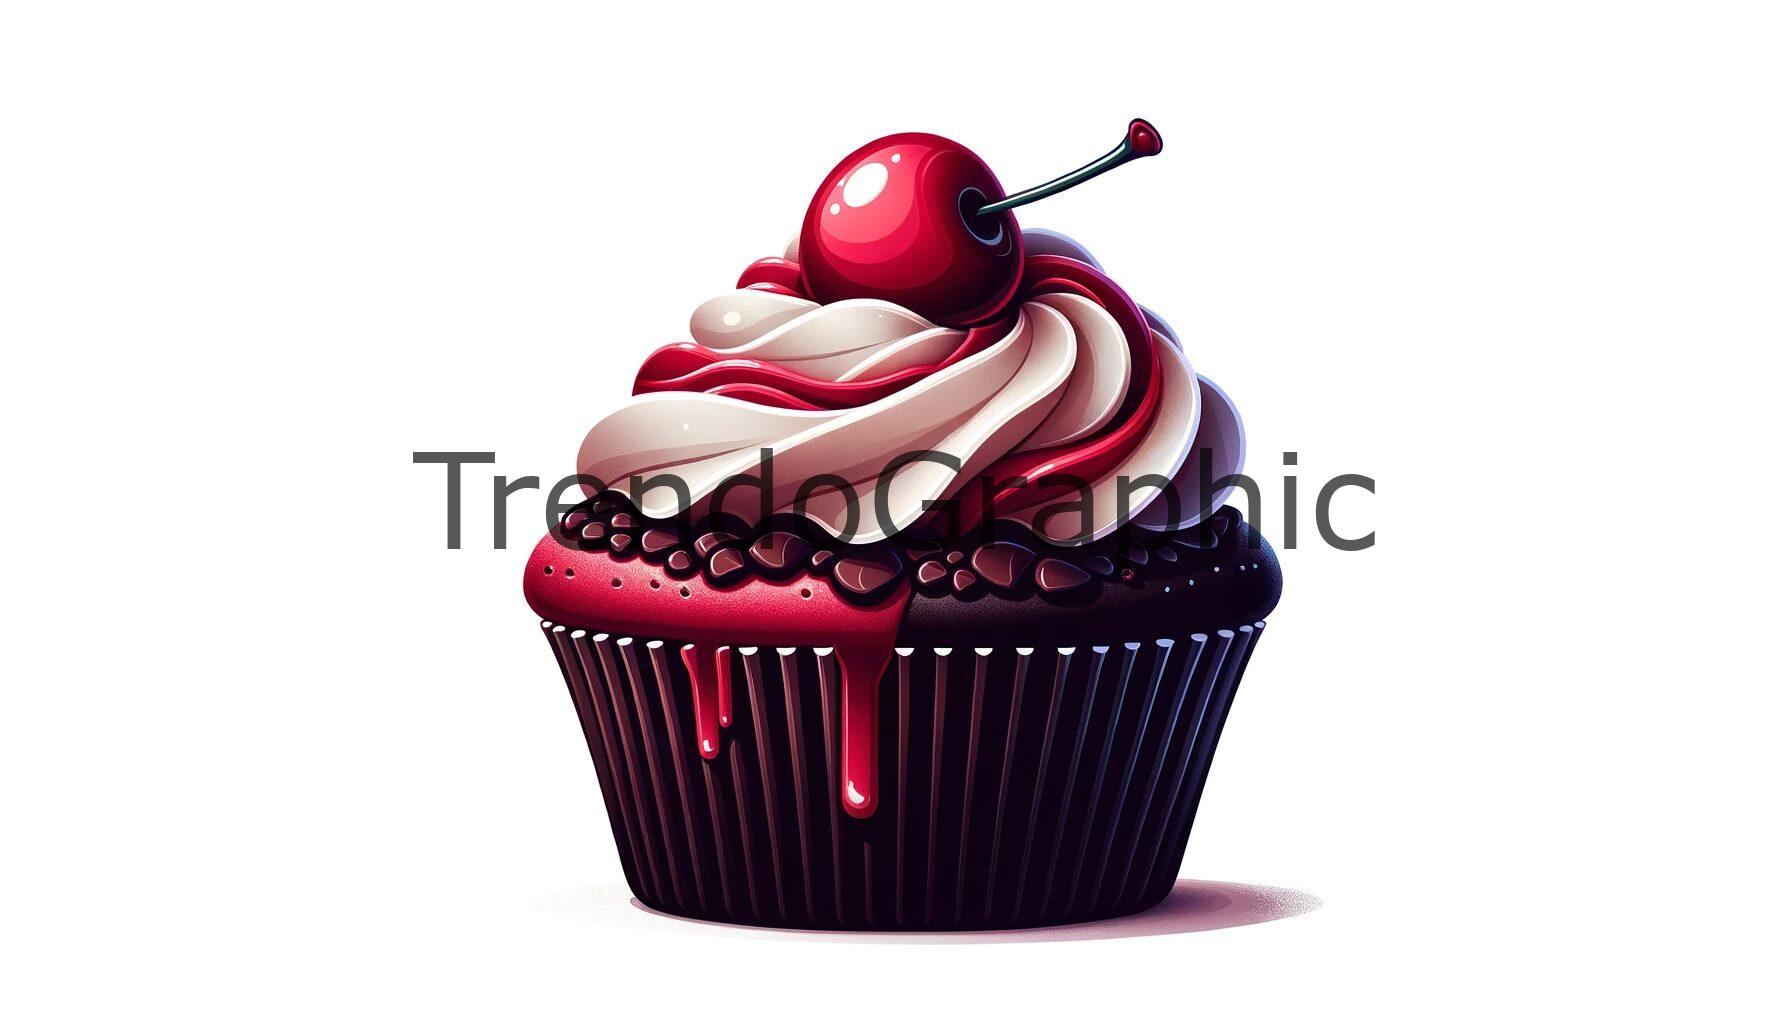 Black Forest Cupcake with Cherry Filled Perfection